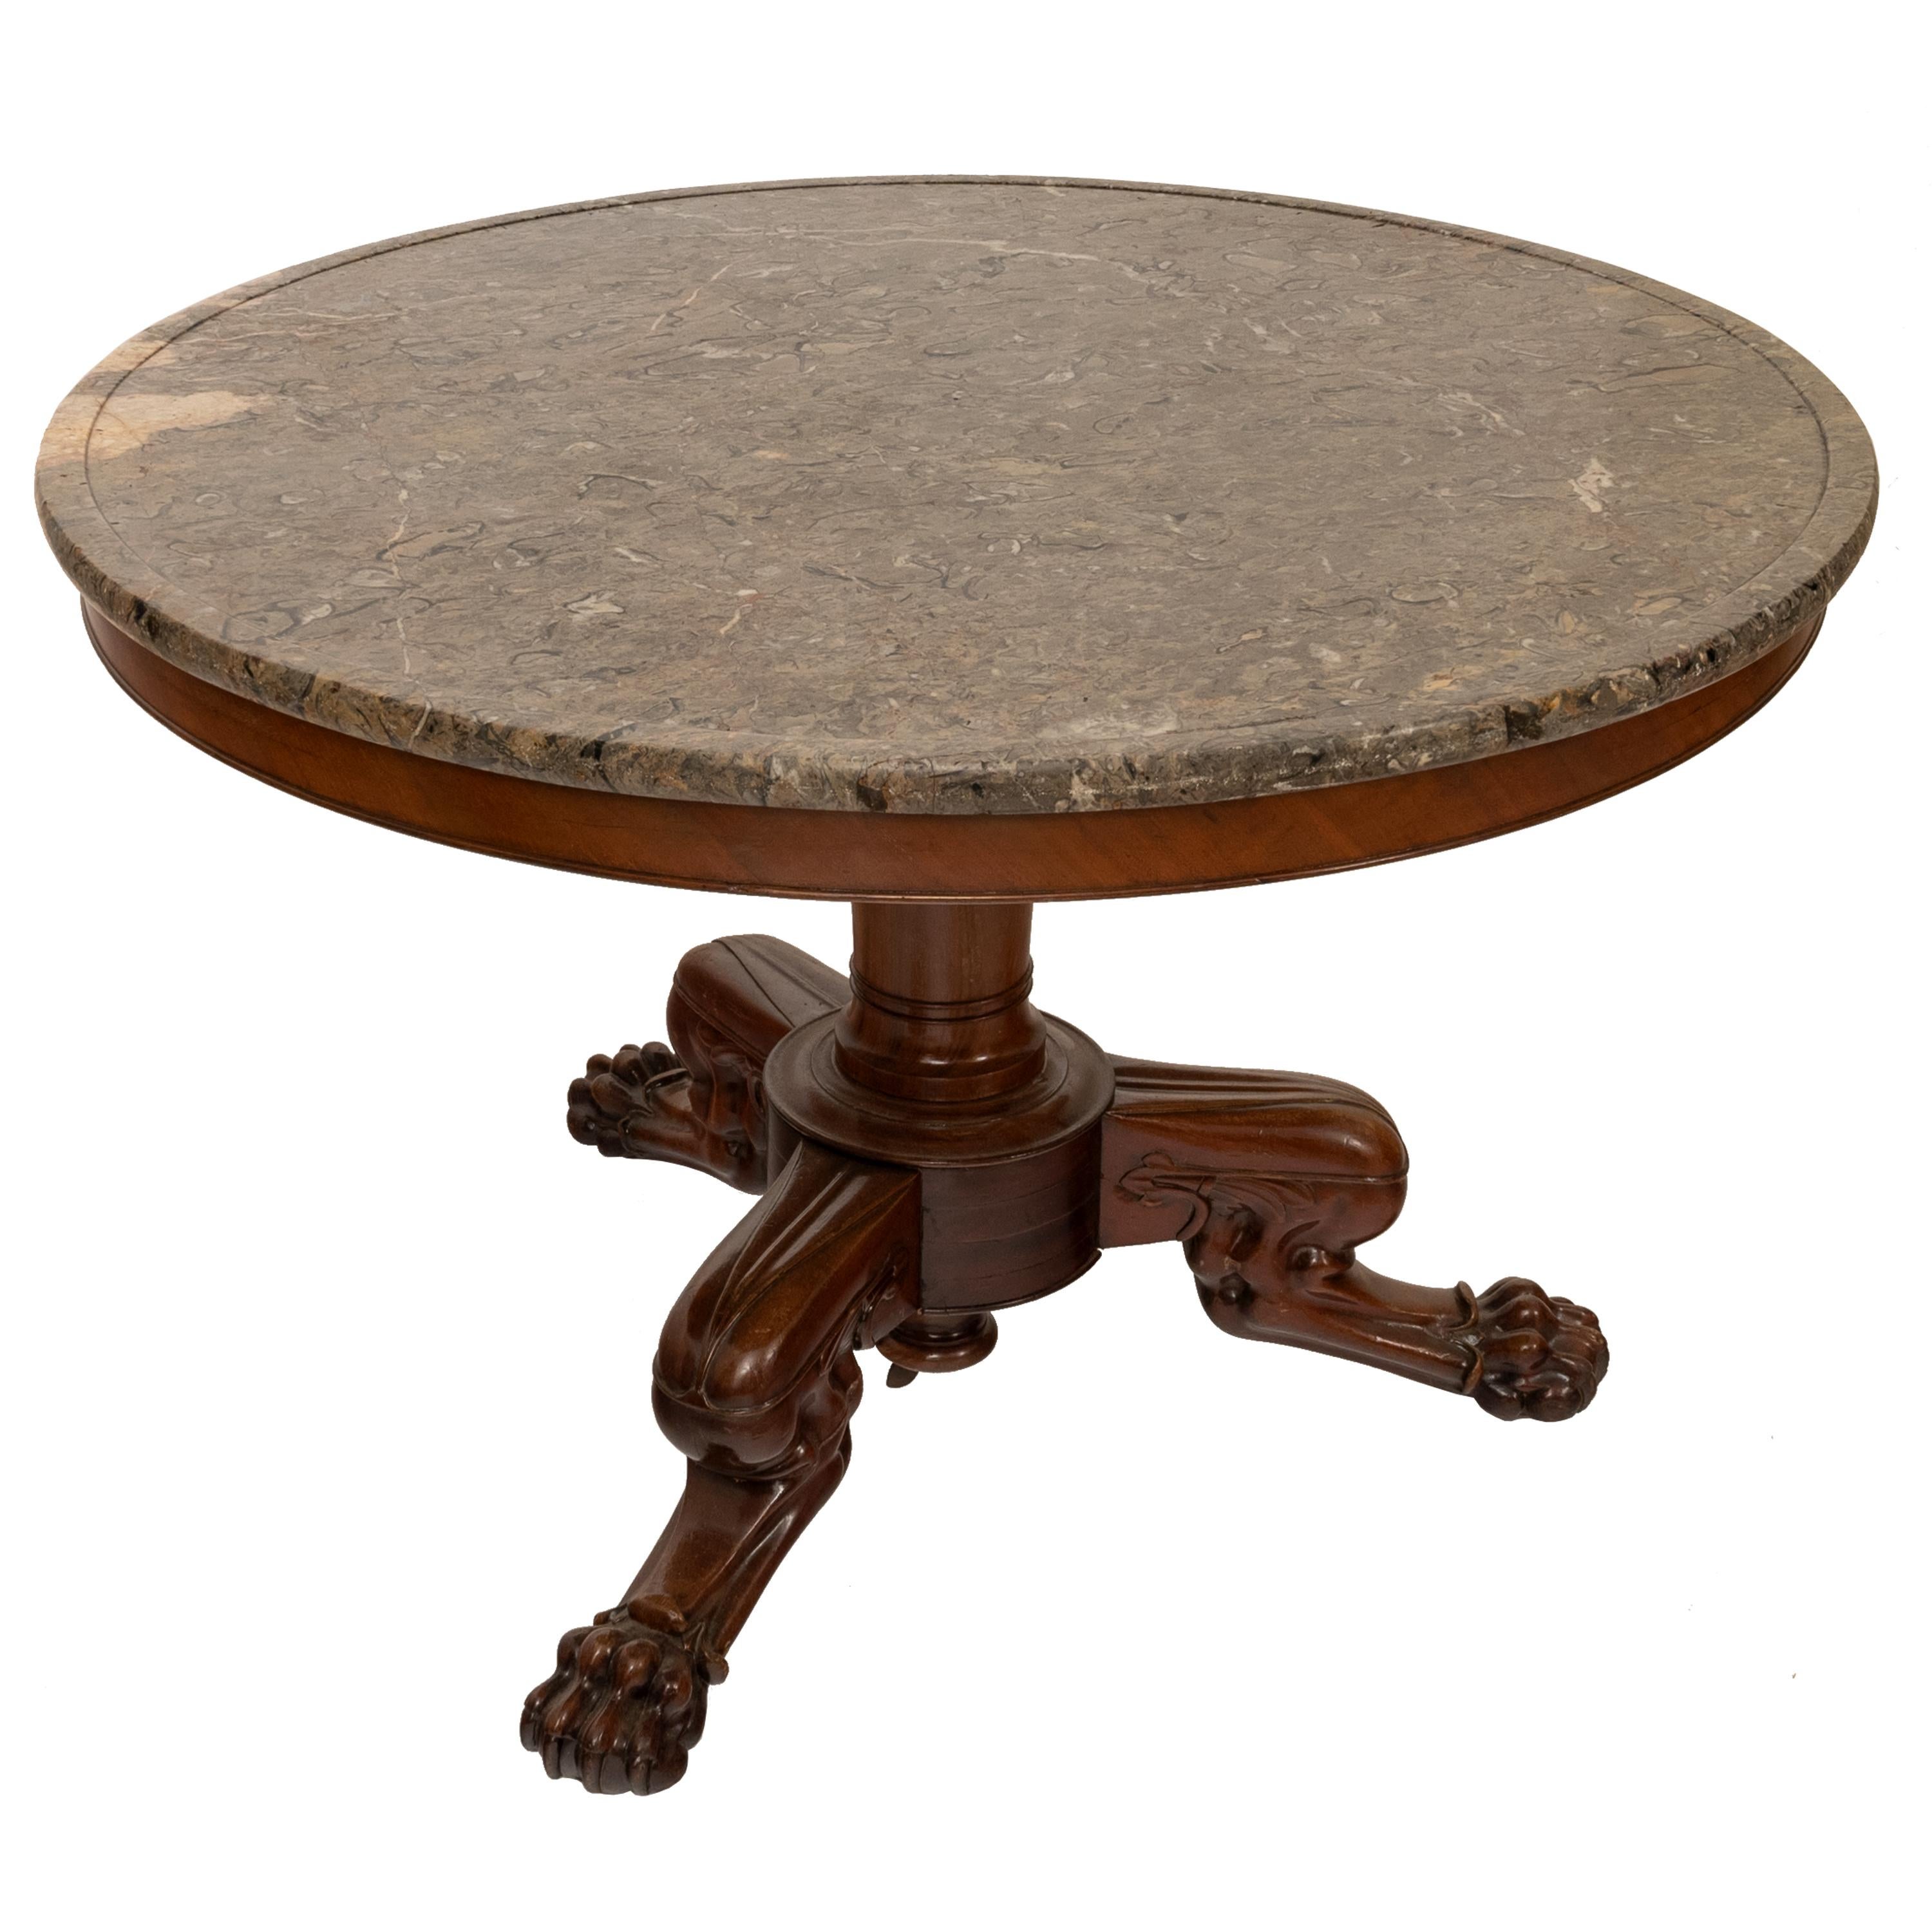 Antique French Louis Philippe Marble Top Carved Mahogany Round Tripod Table 1850 1